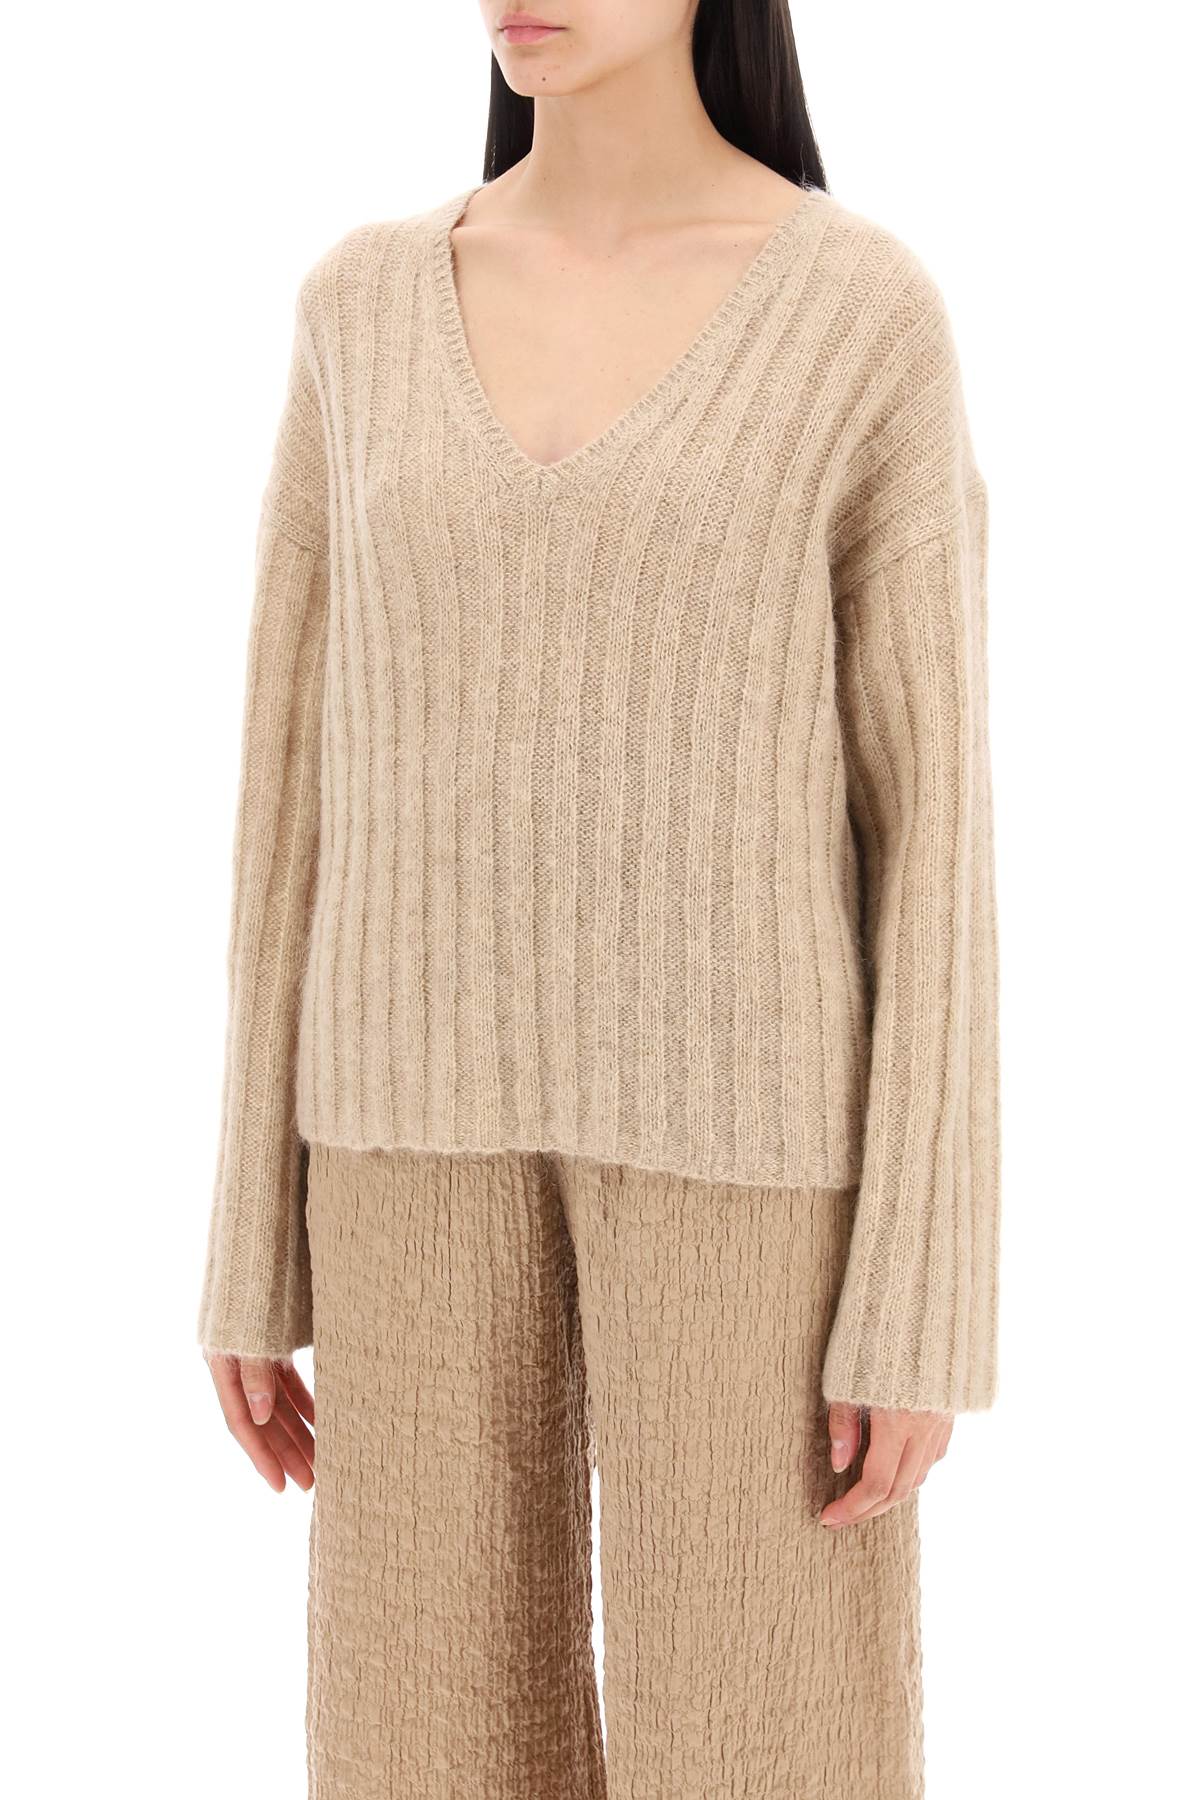 cimone sweater in flat-ribbed knit-3